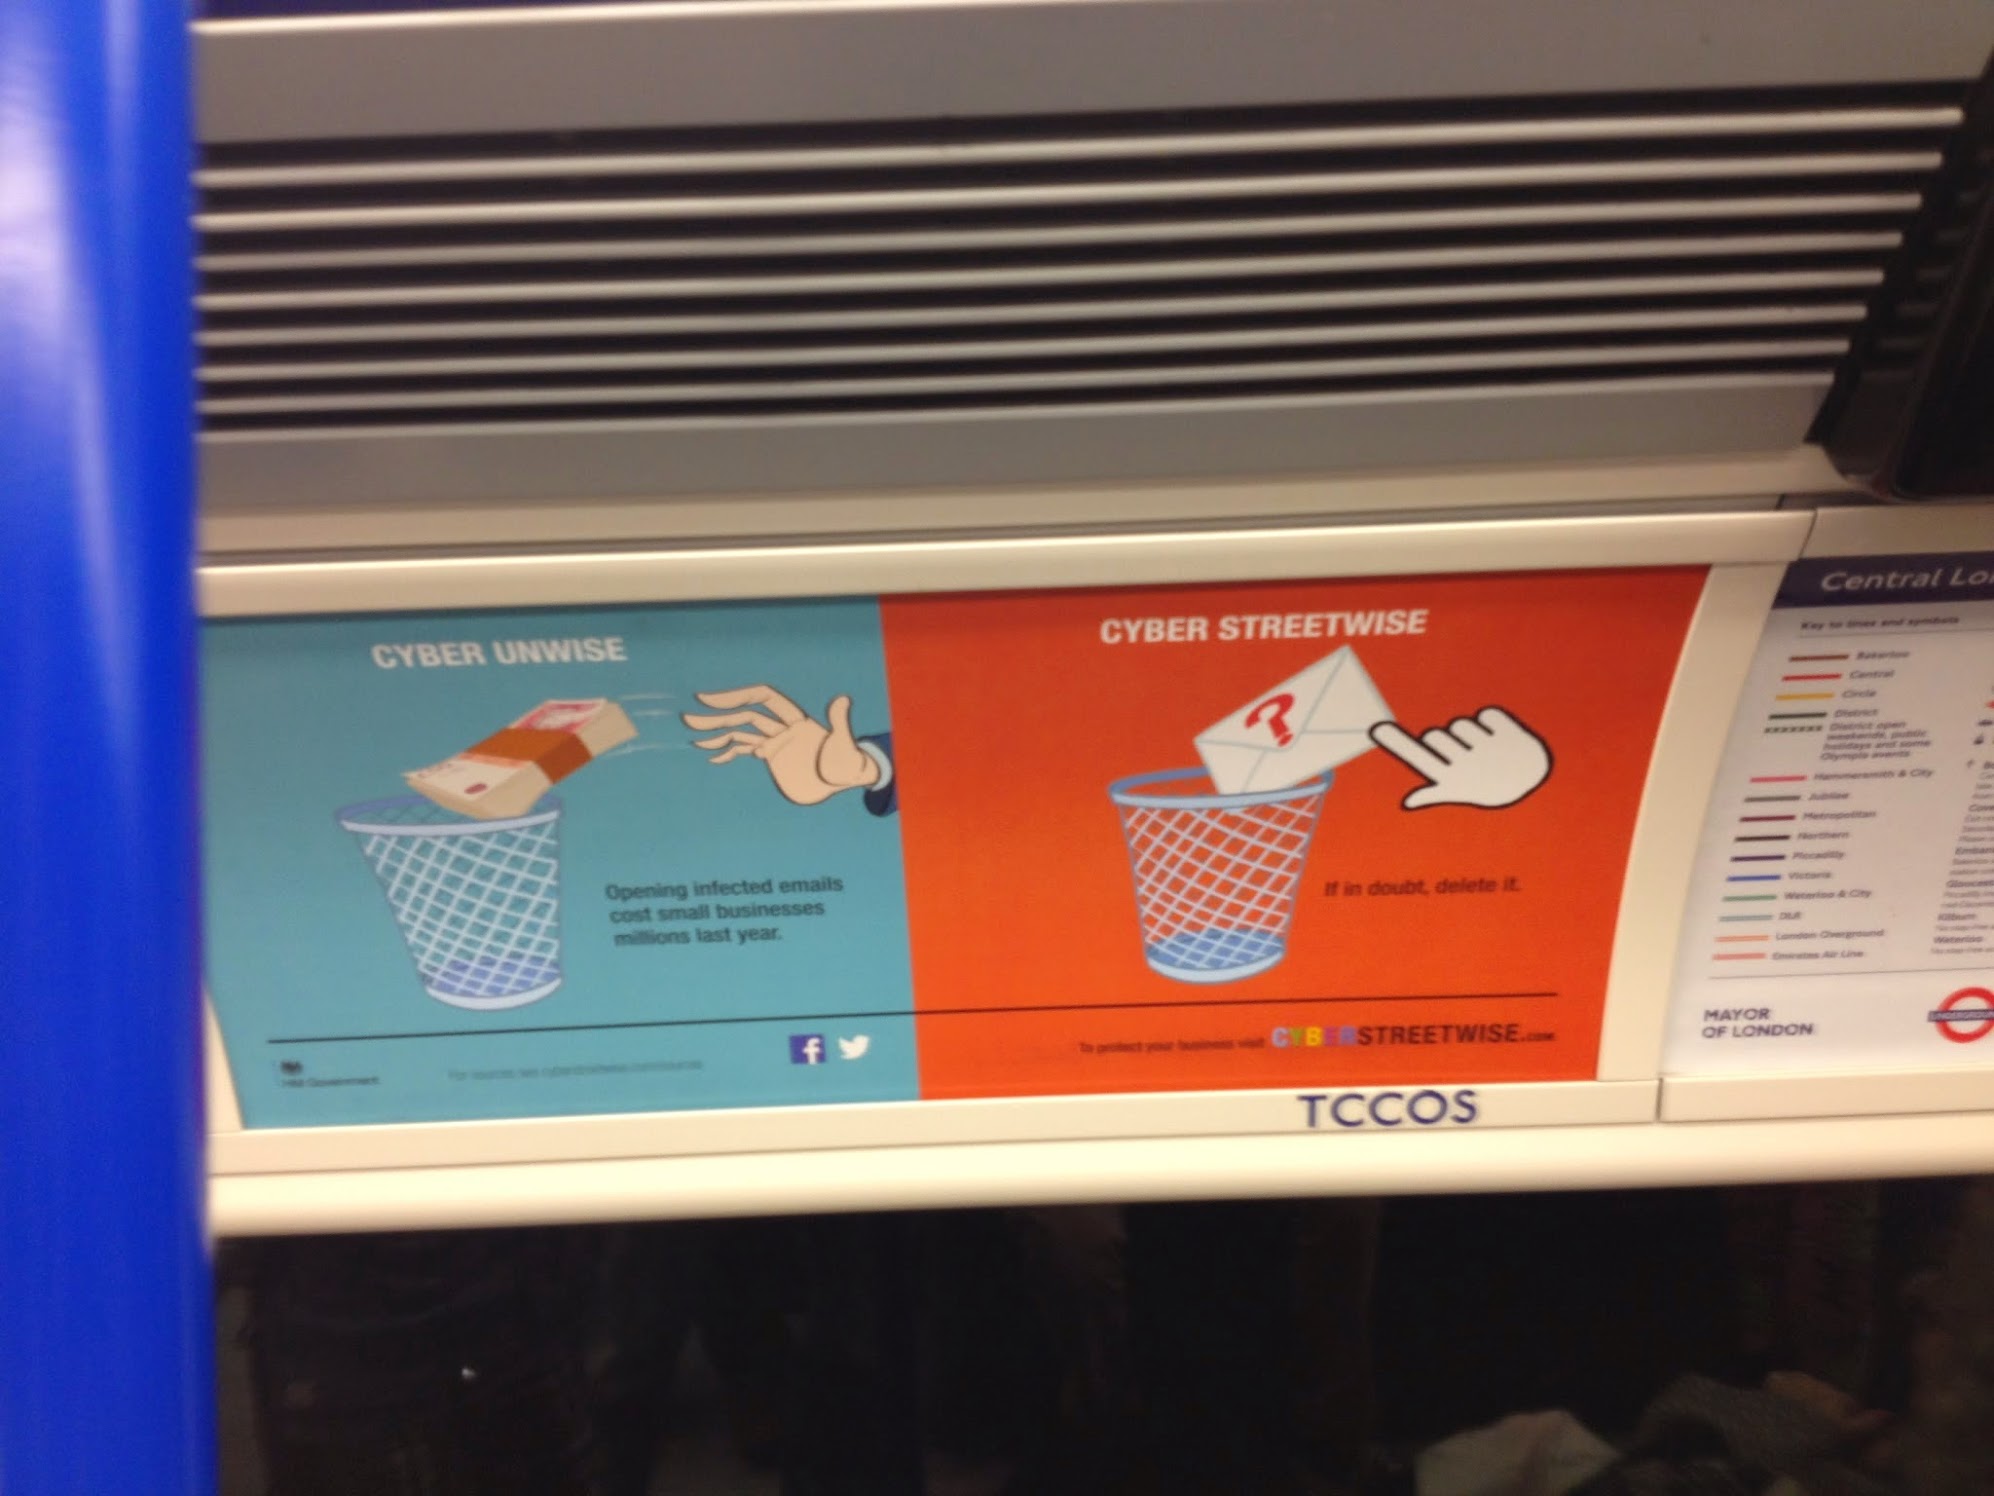 Tube Ad for Cyberstreetwise campaign